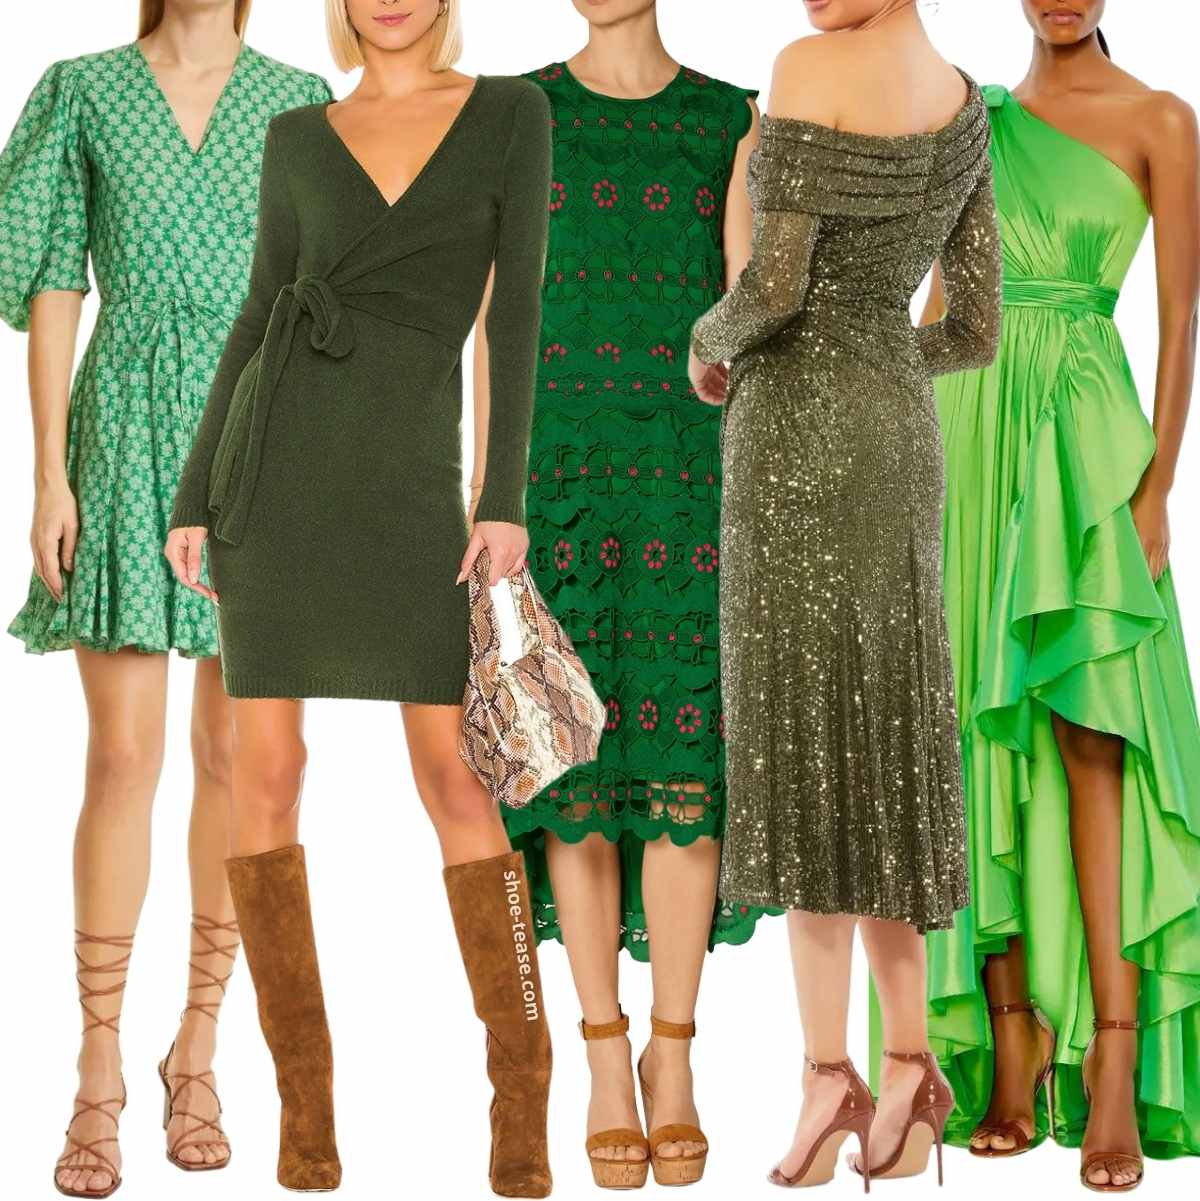 Buy > heels that go with green dress > in stock